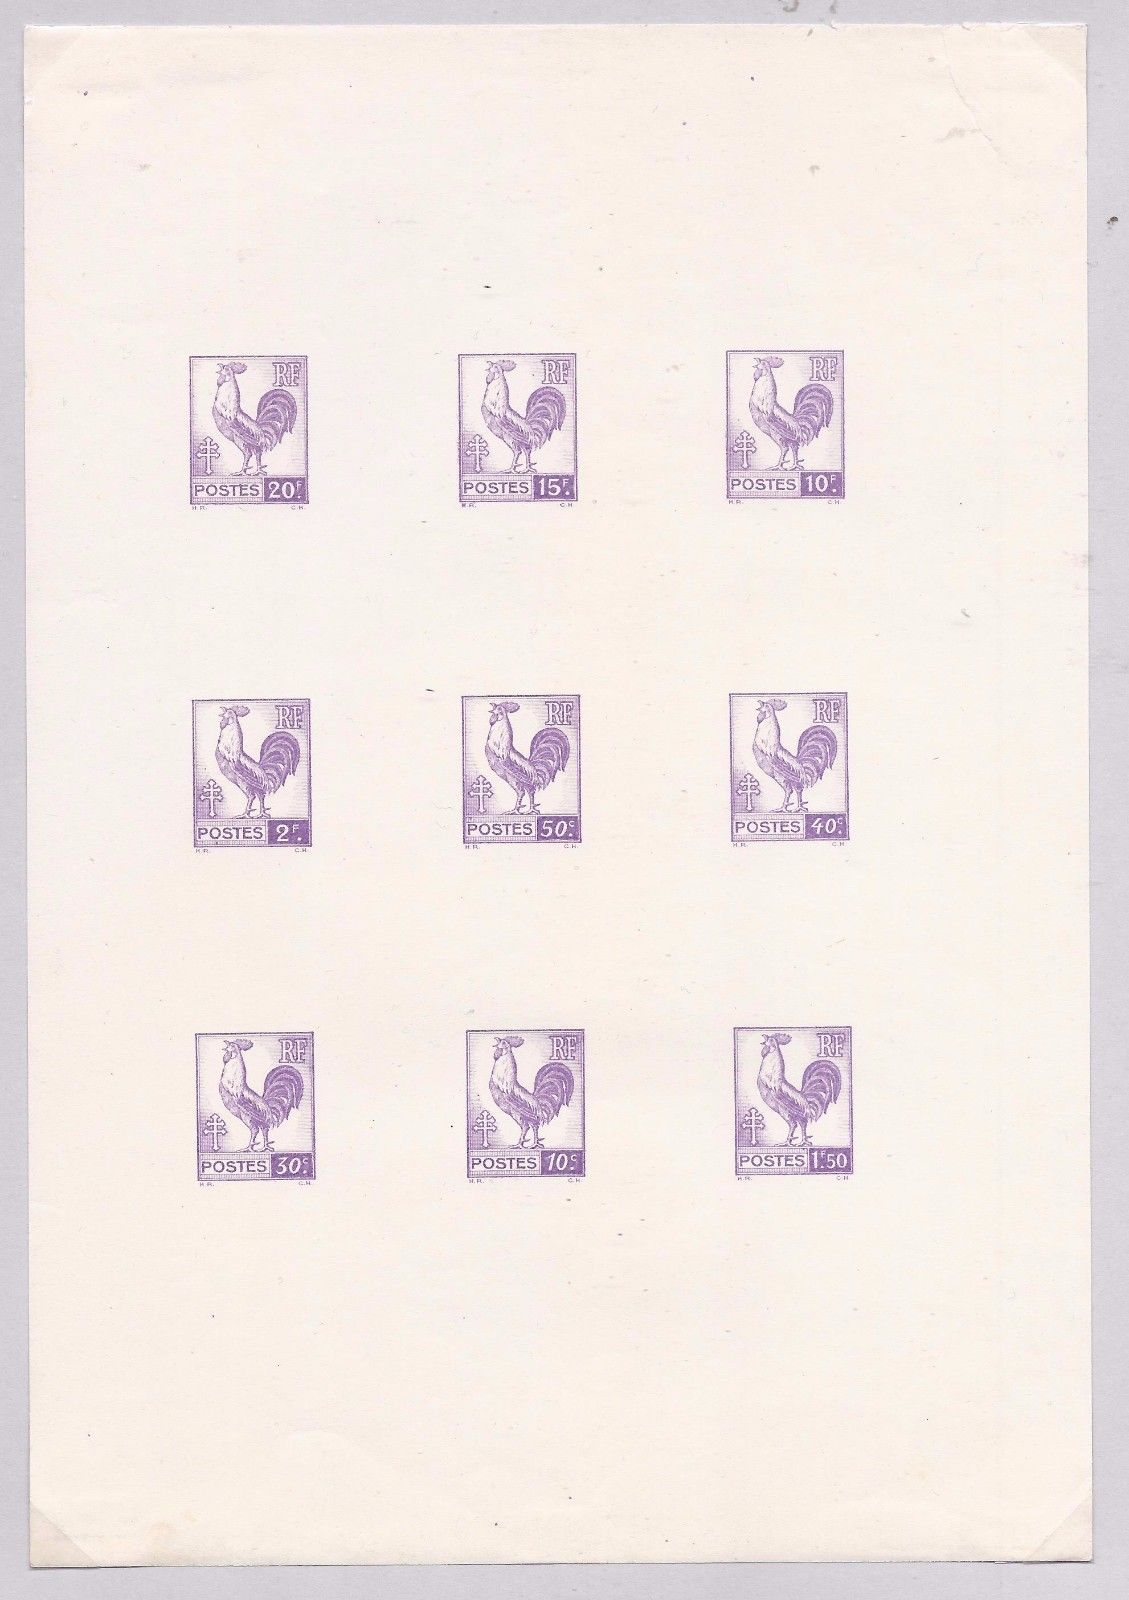 France 1940s Gallic Cock proof sheet of 9 values in violet shade